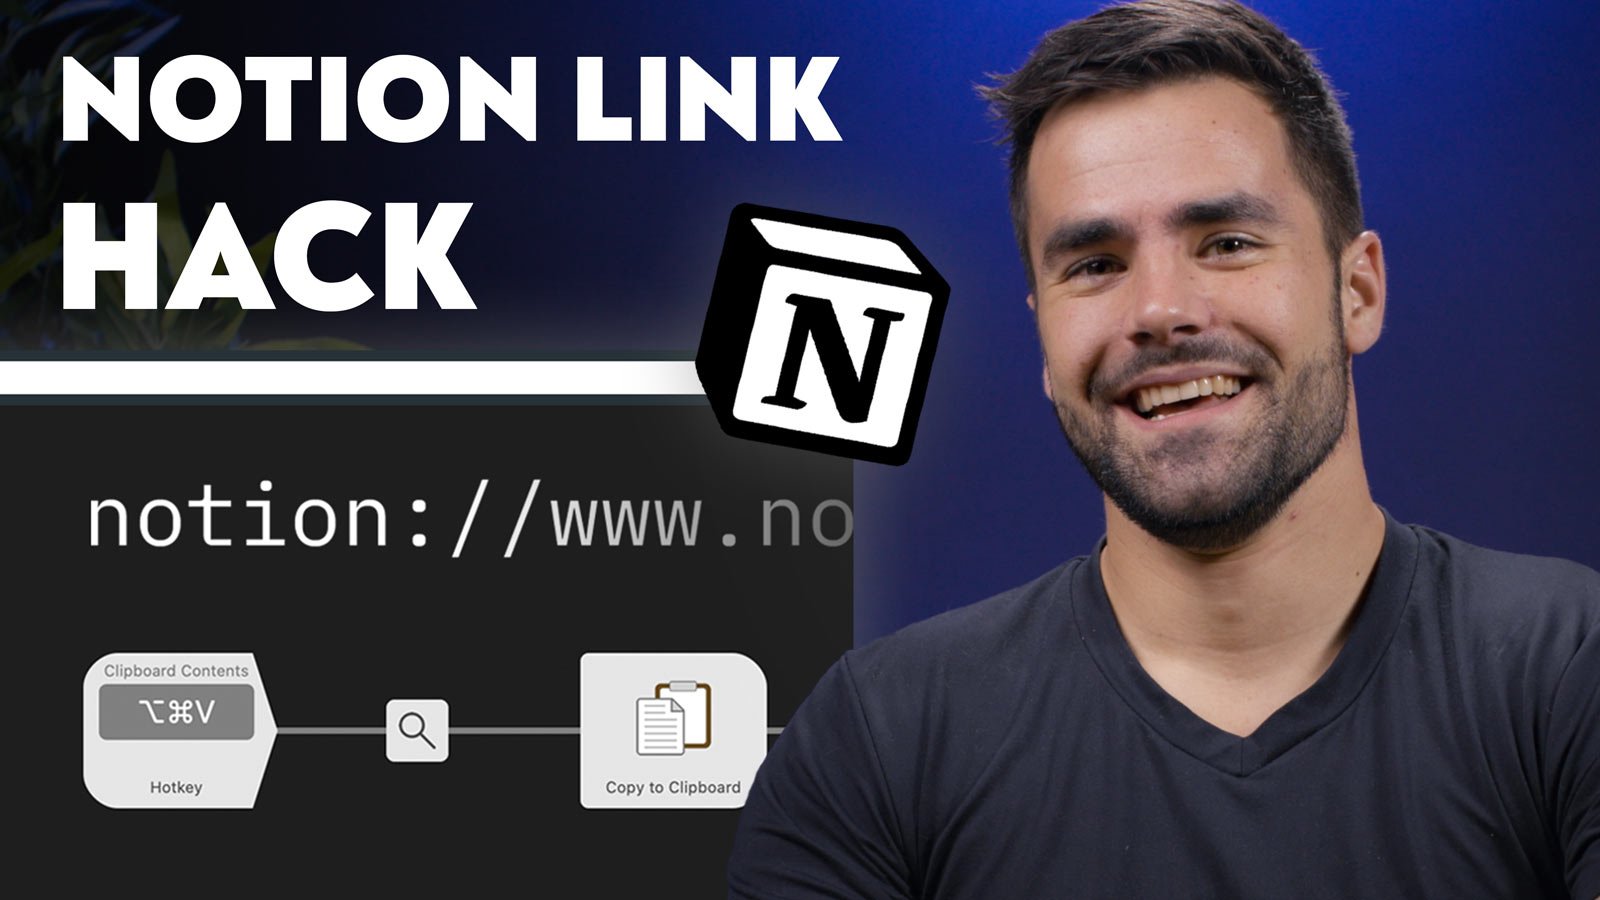 How to Share Notion Links That Open Directly in the App Thomas Frank